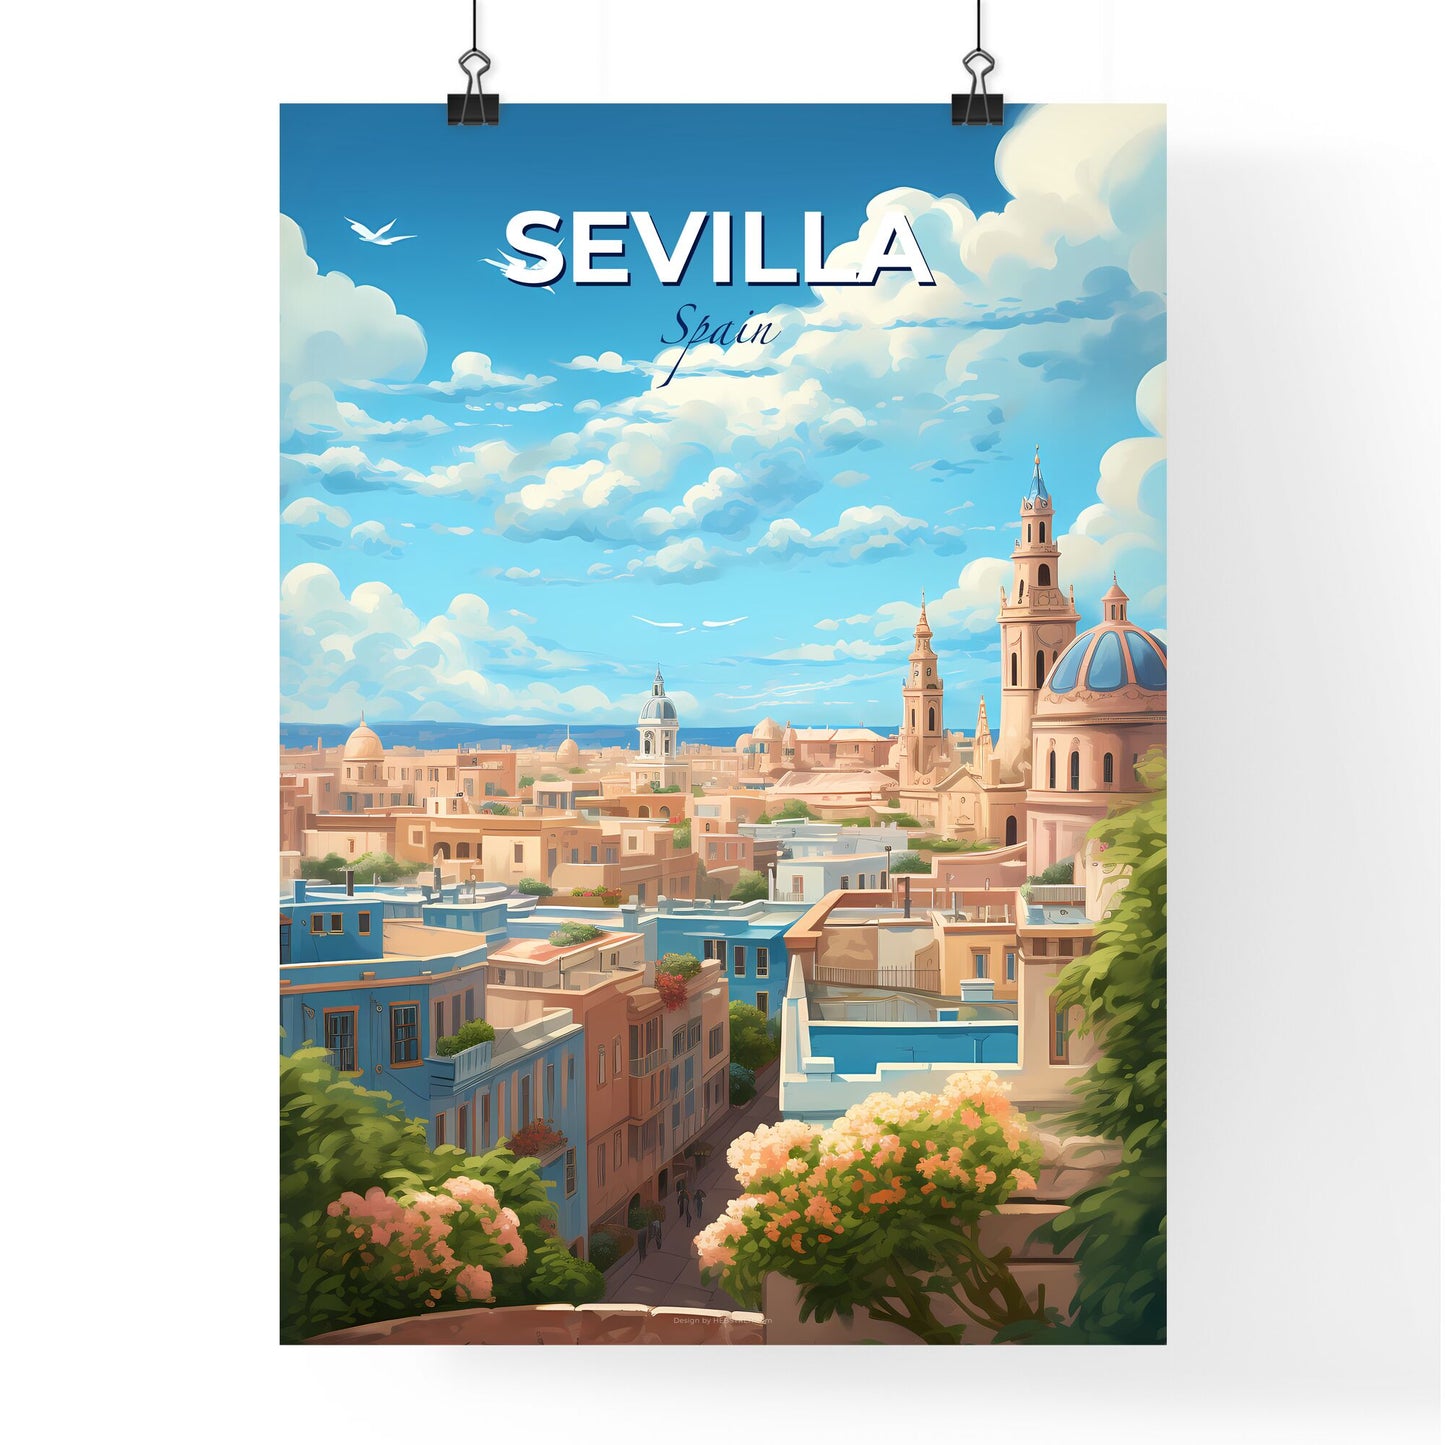 Sevilla Spain Skyline - A City With A Blue Sky And Clouds - Customizable Travel Gift Default Title